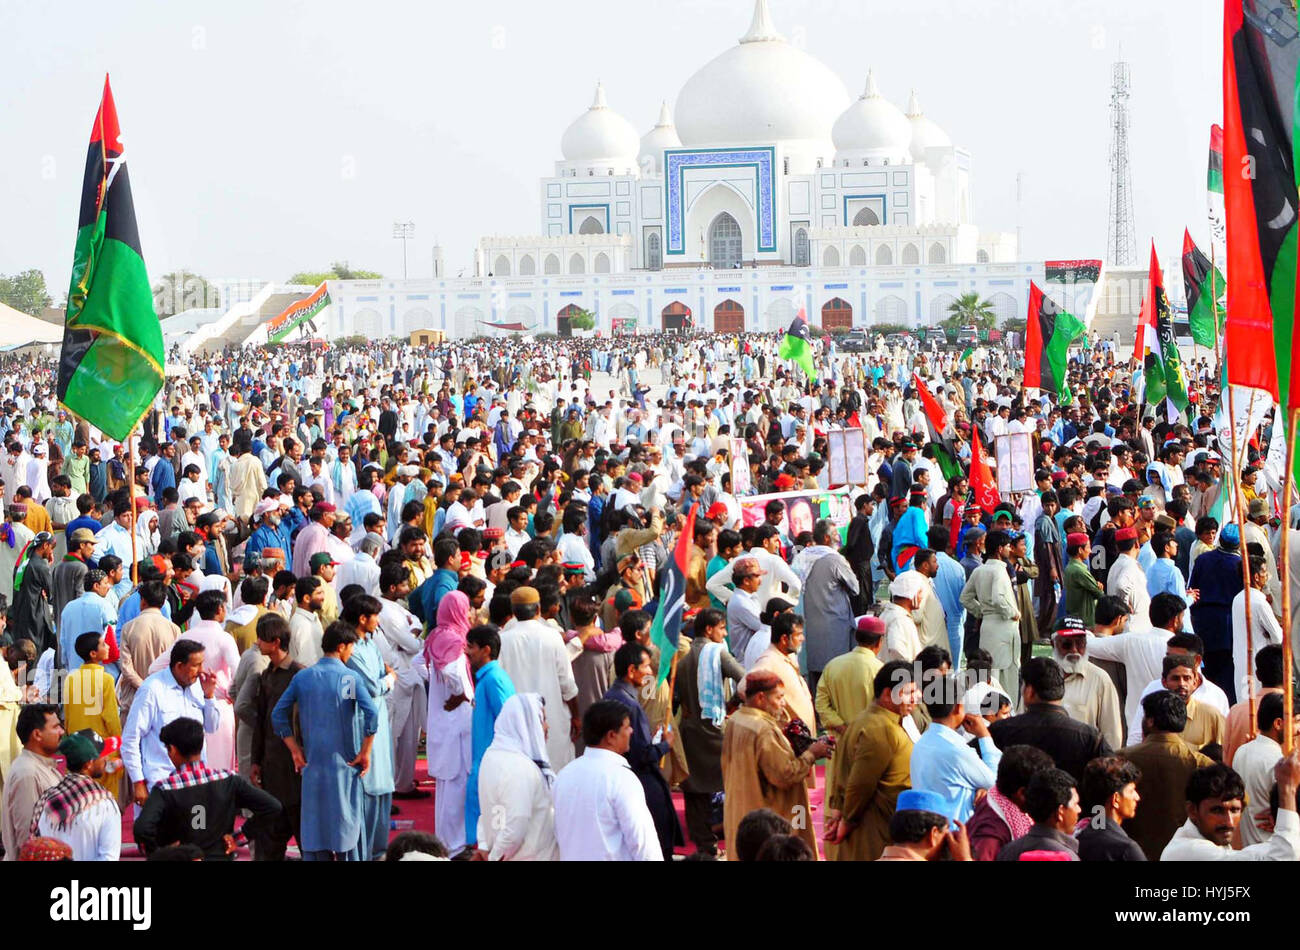 Karachi, Pakistan. 4th April, 2017. Large numbers of activists of Peoples Party (PPP) are gathering to mark 38th death anniversary of Zulfiqar Ali Bhutto, held at Bhutto's Mausoleum in Garhi Khuda Bux on Tuesday, April 04, 2017. Credit: Asianet-Pakistan/Alamy Live News Stock Photo